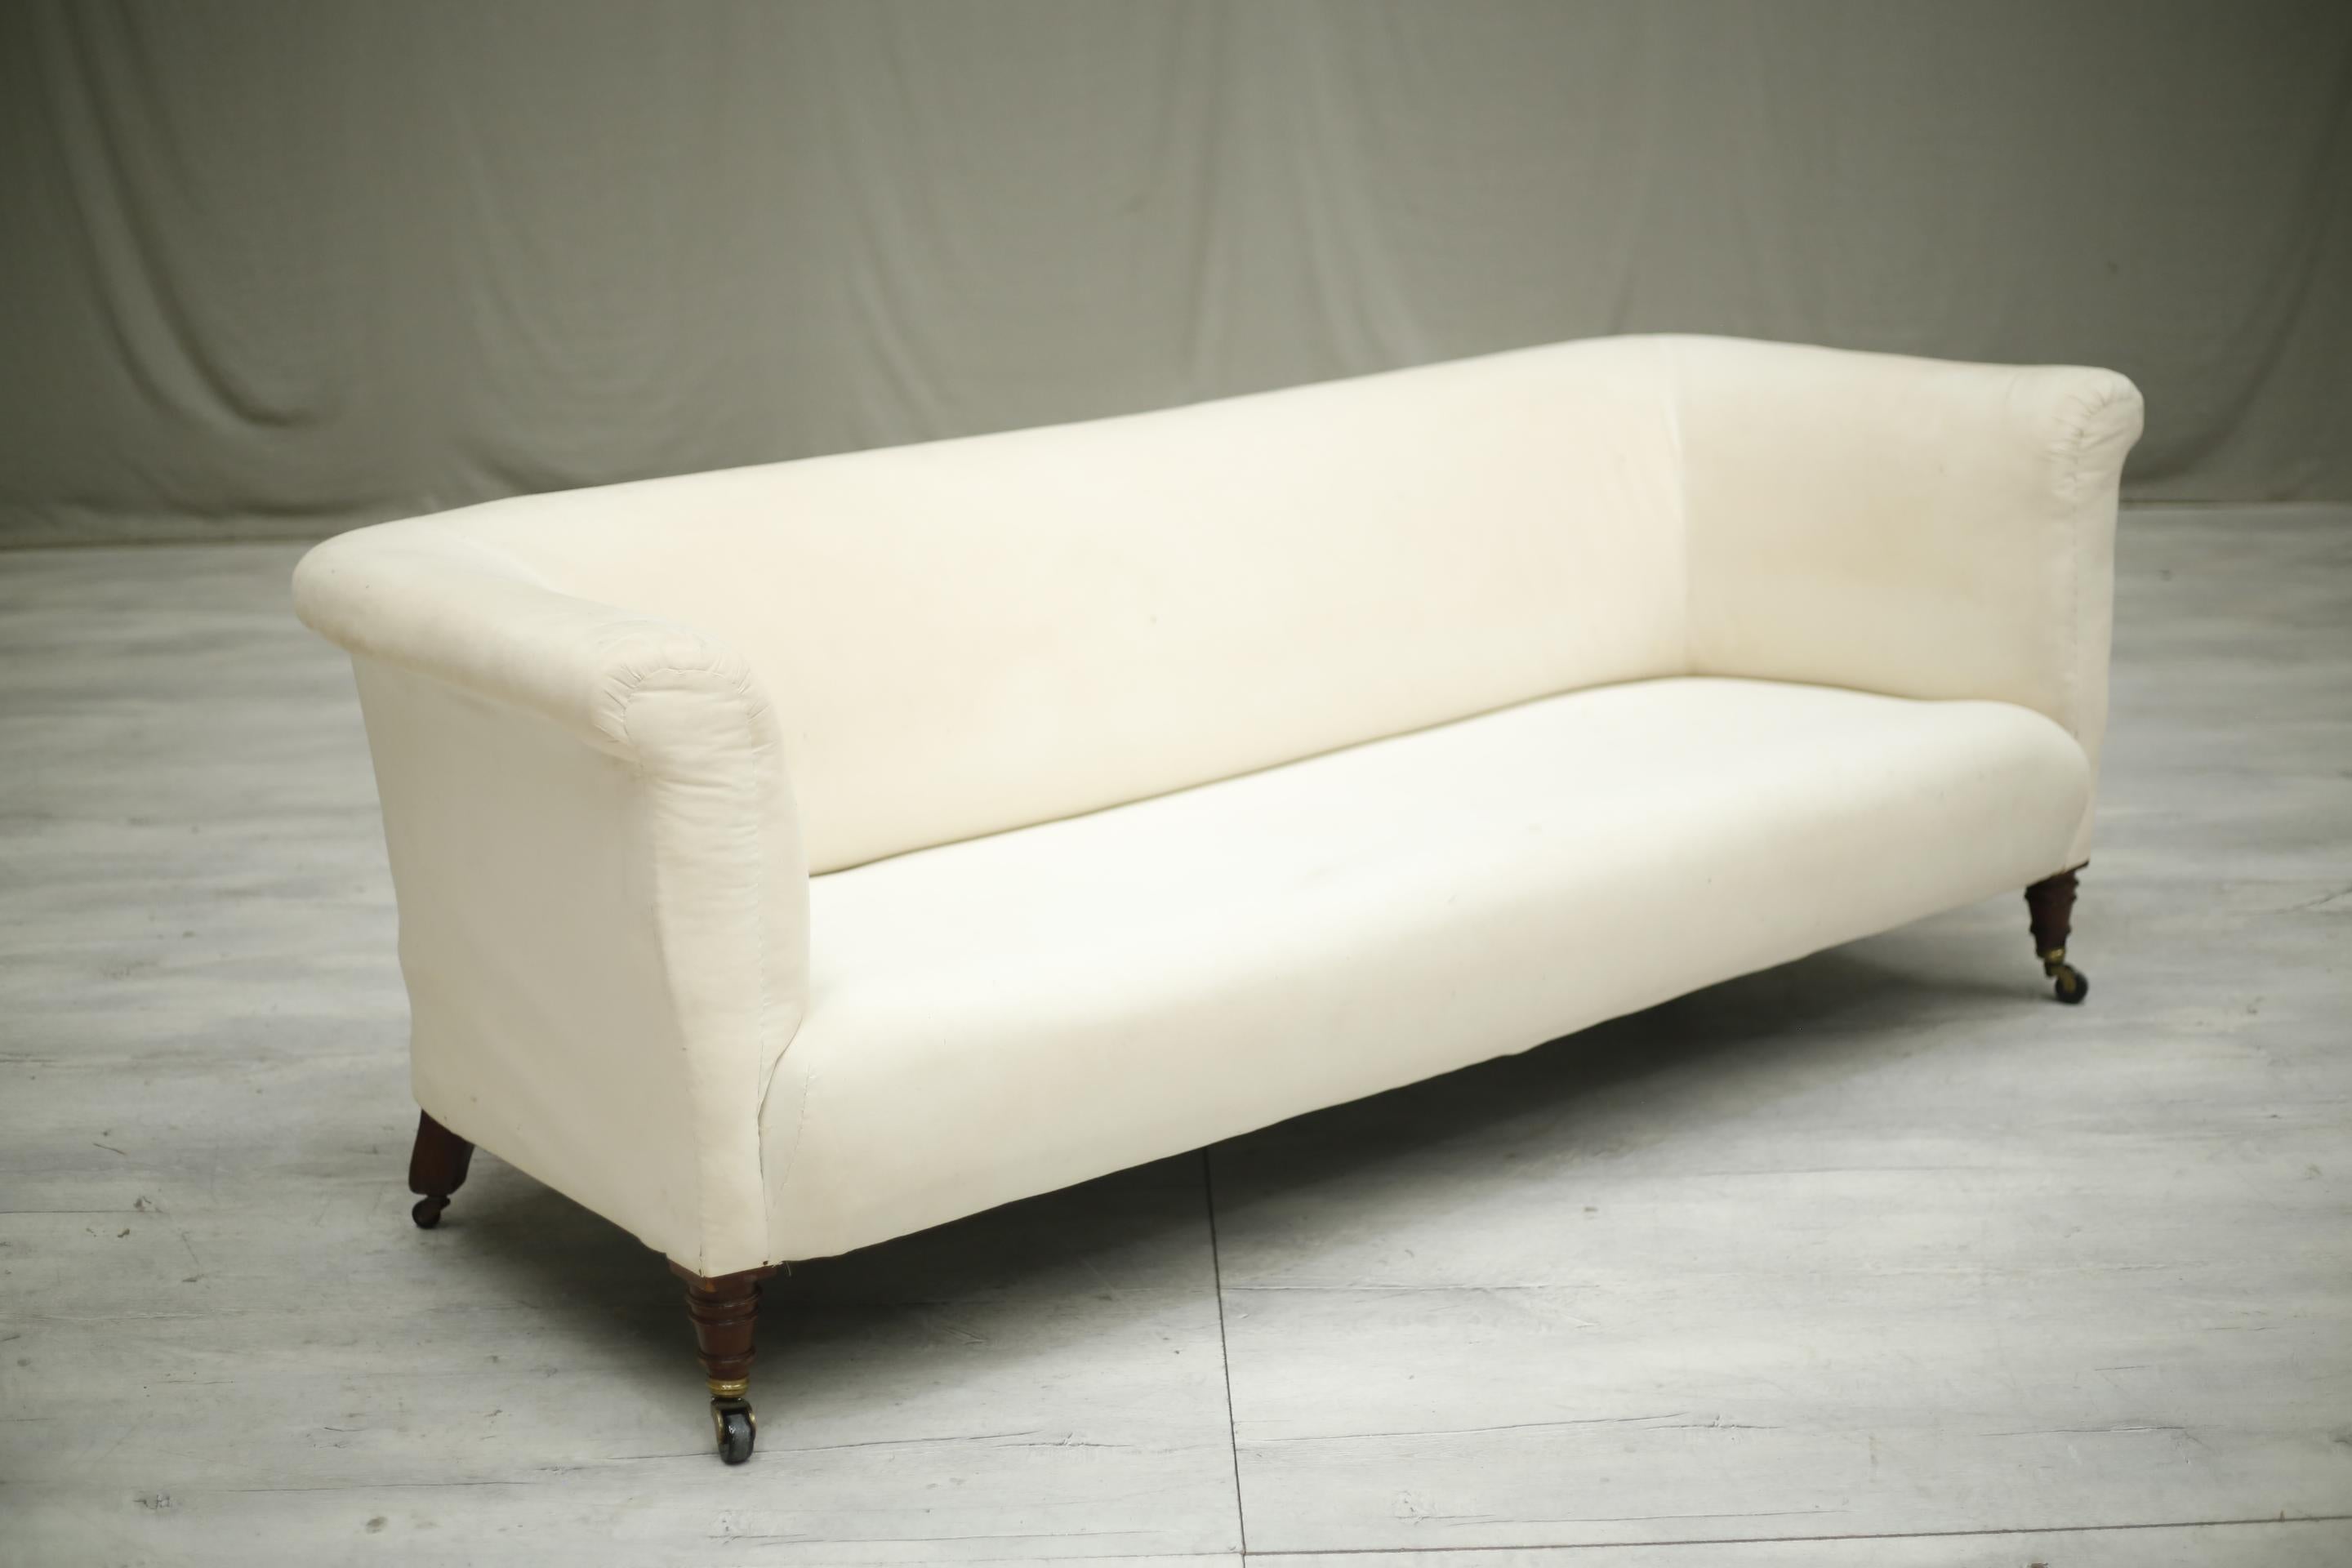 If you would like this sofa upholstered please don't hesitate get in touch. We can upholster all seating on sale. This would require 10 metres of material. You can supply your own or please browse our collections under the material section.

All